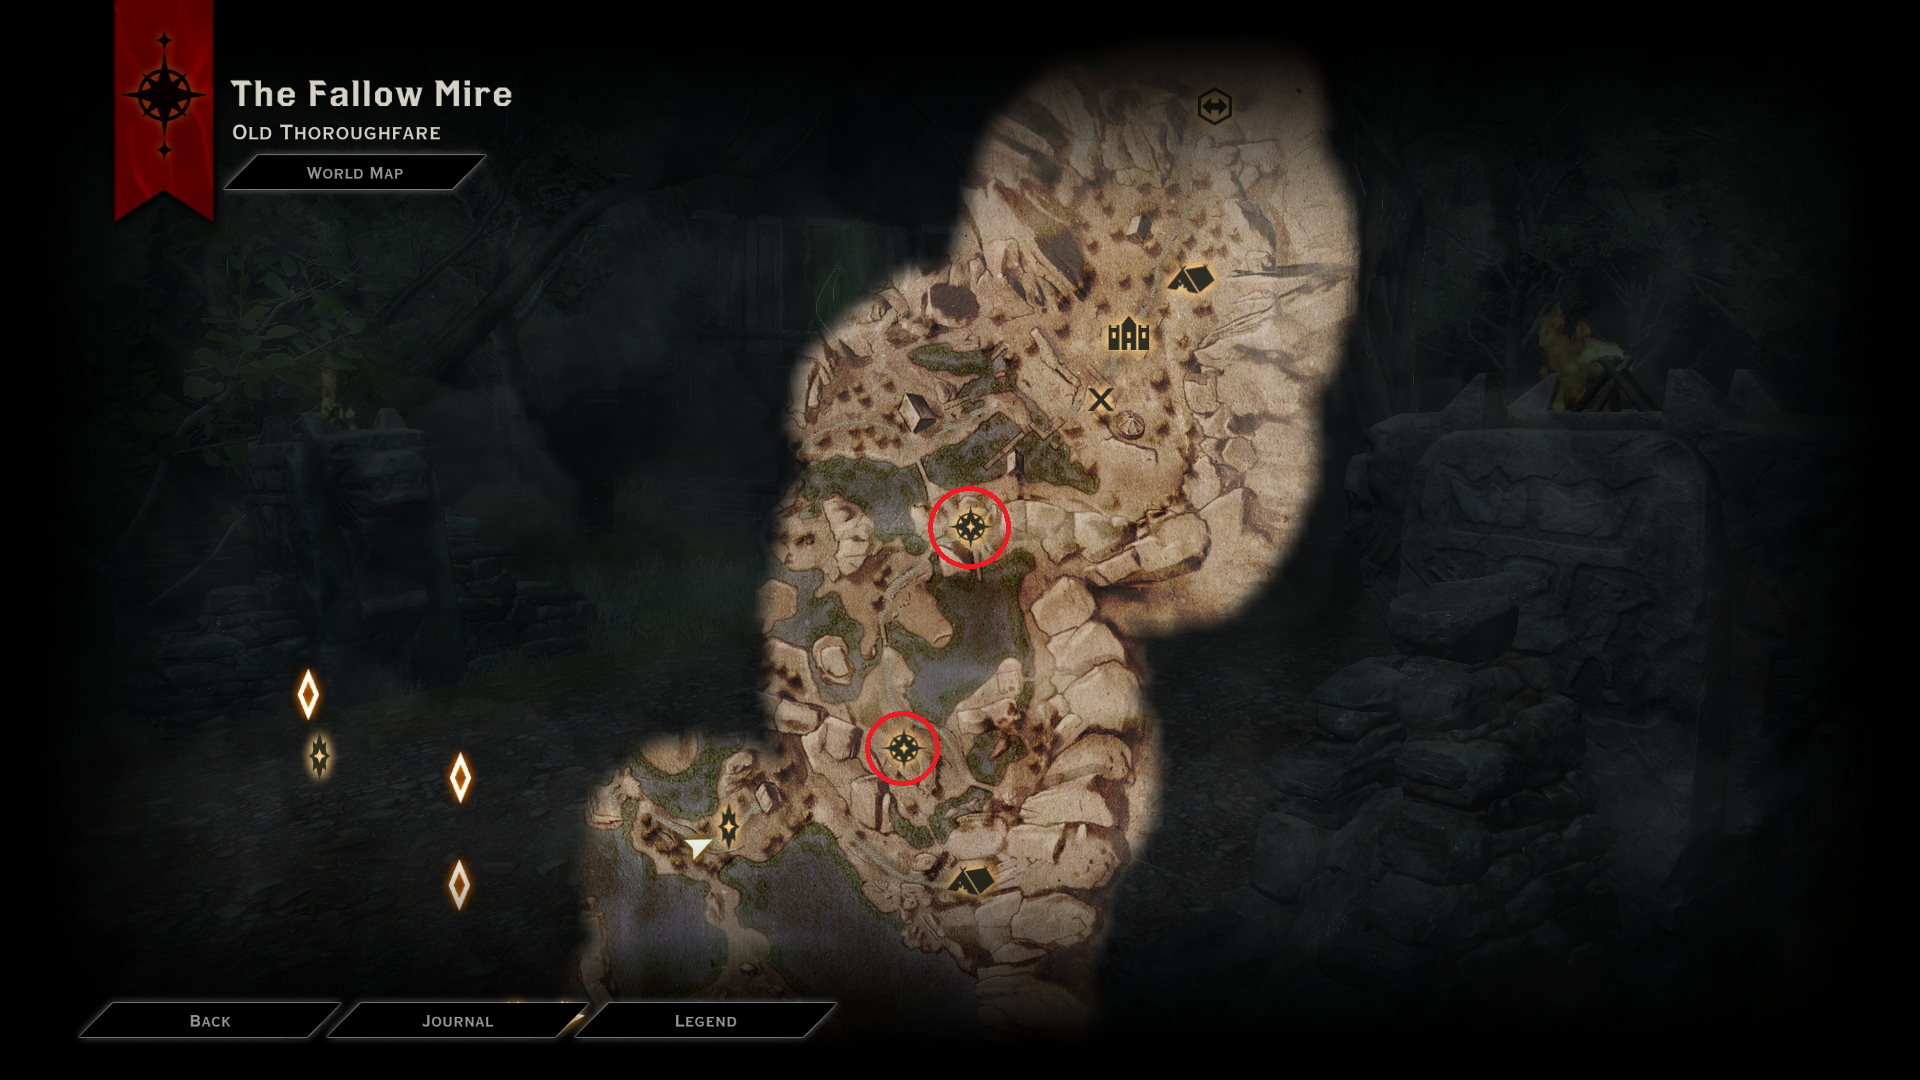 Dragon Age 3: Inquisition Trophy Guide - Fextralife